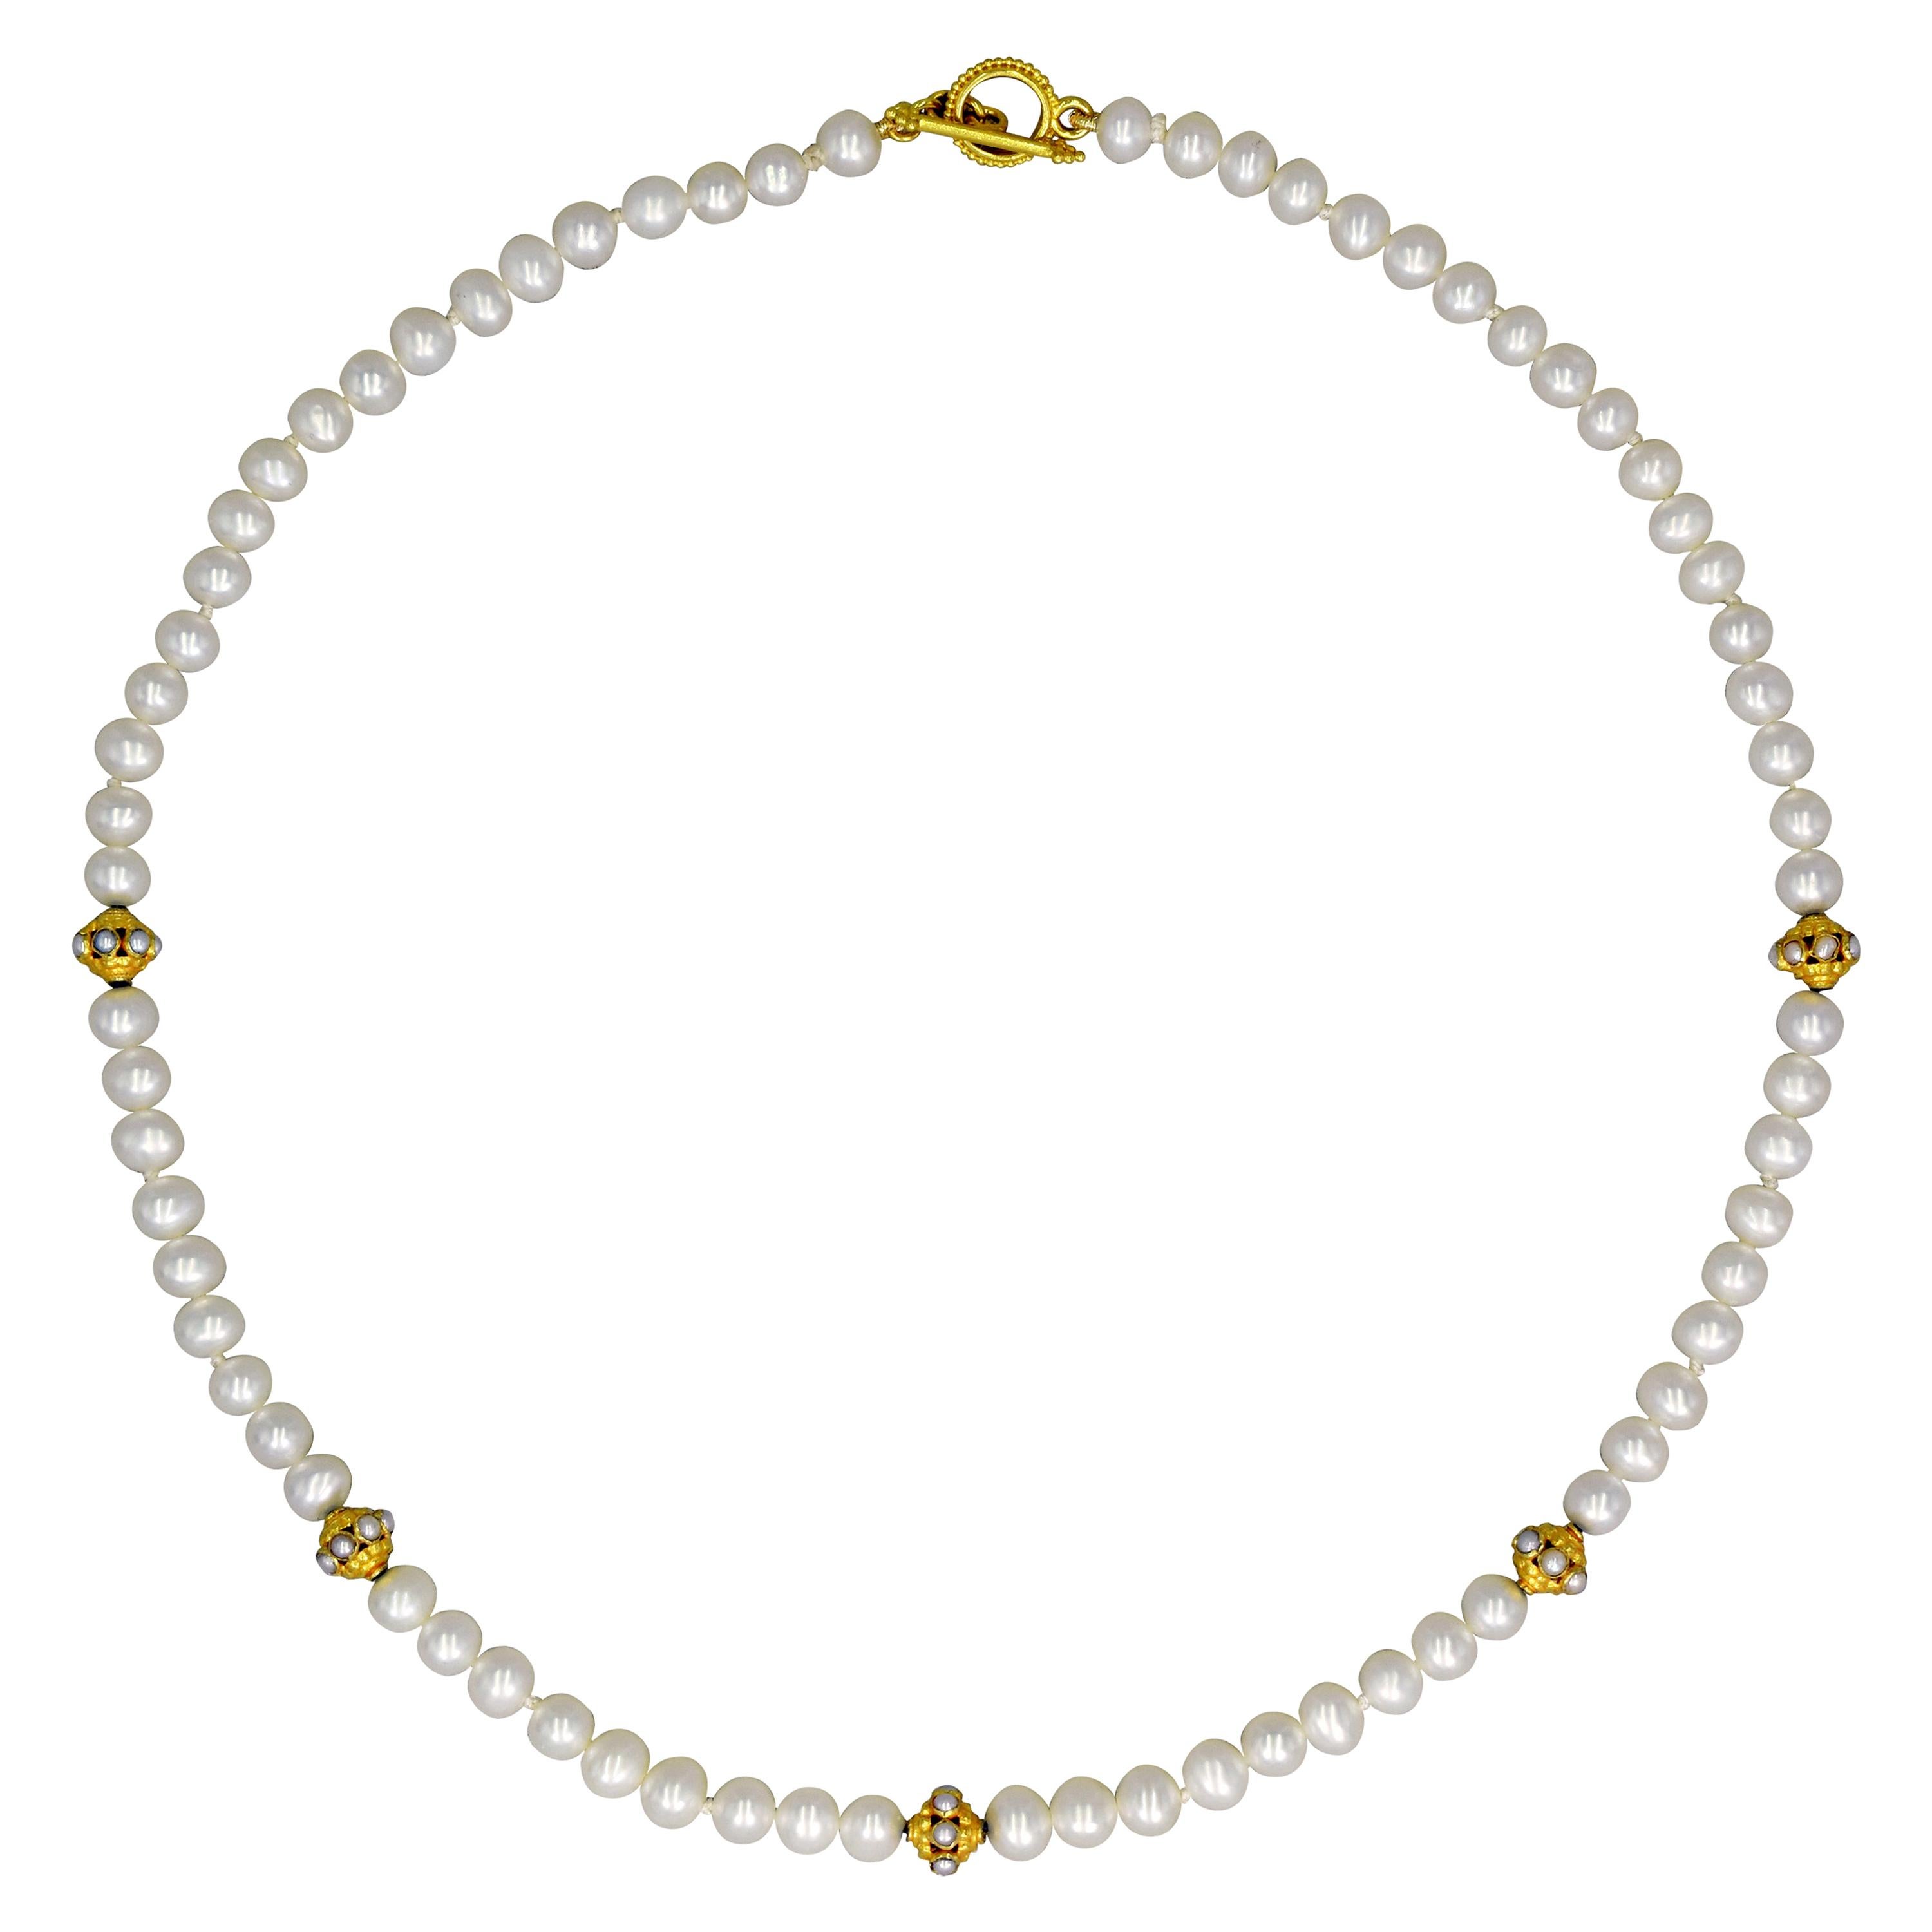 Freshwater Pearl and 22 Karat Gold Beaded Necklace